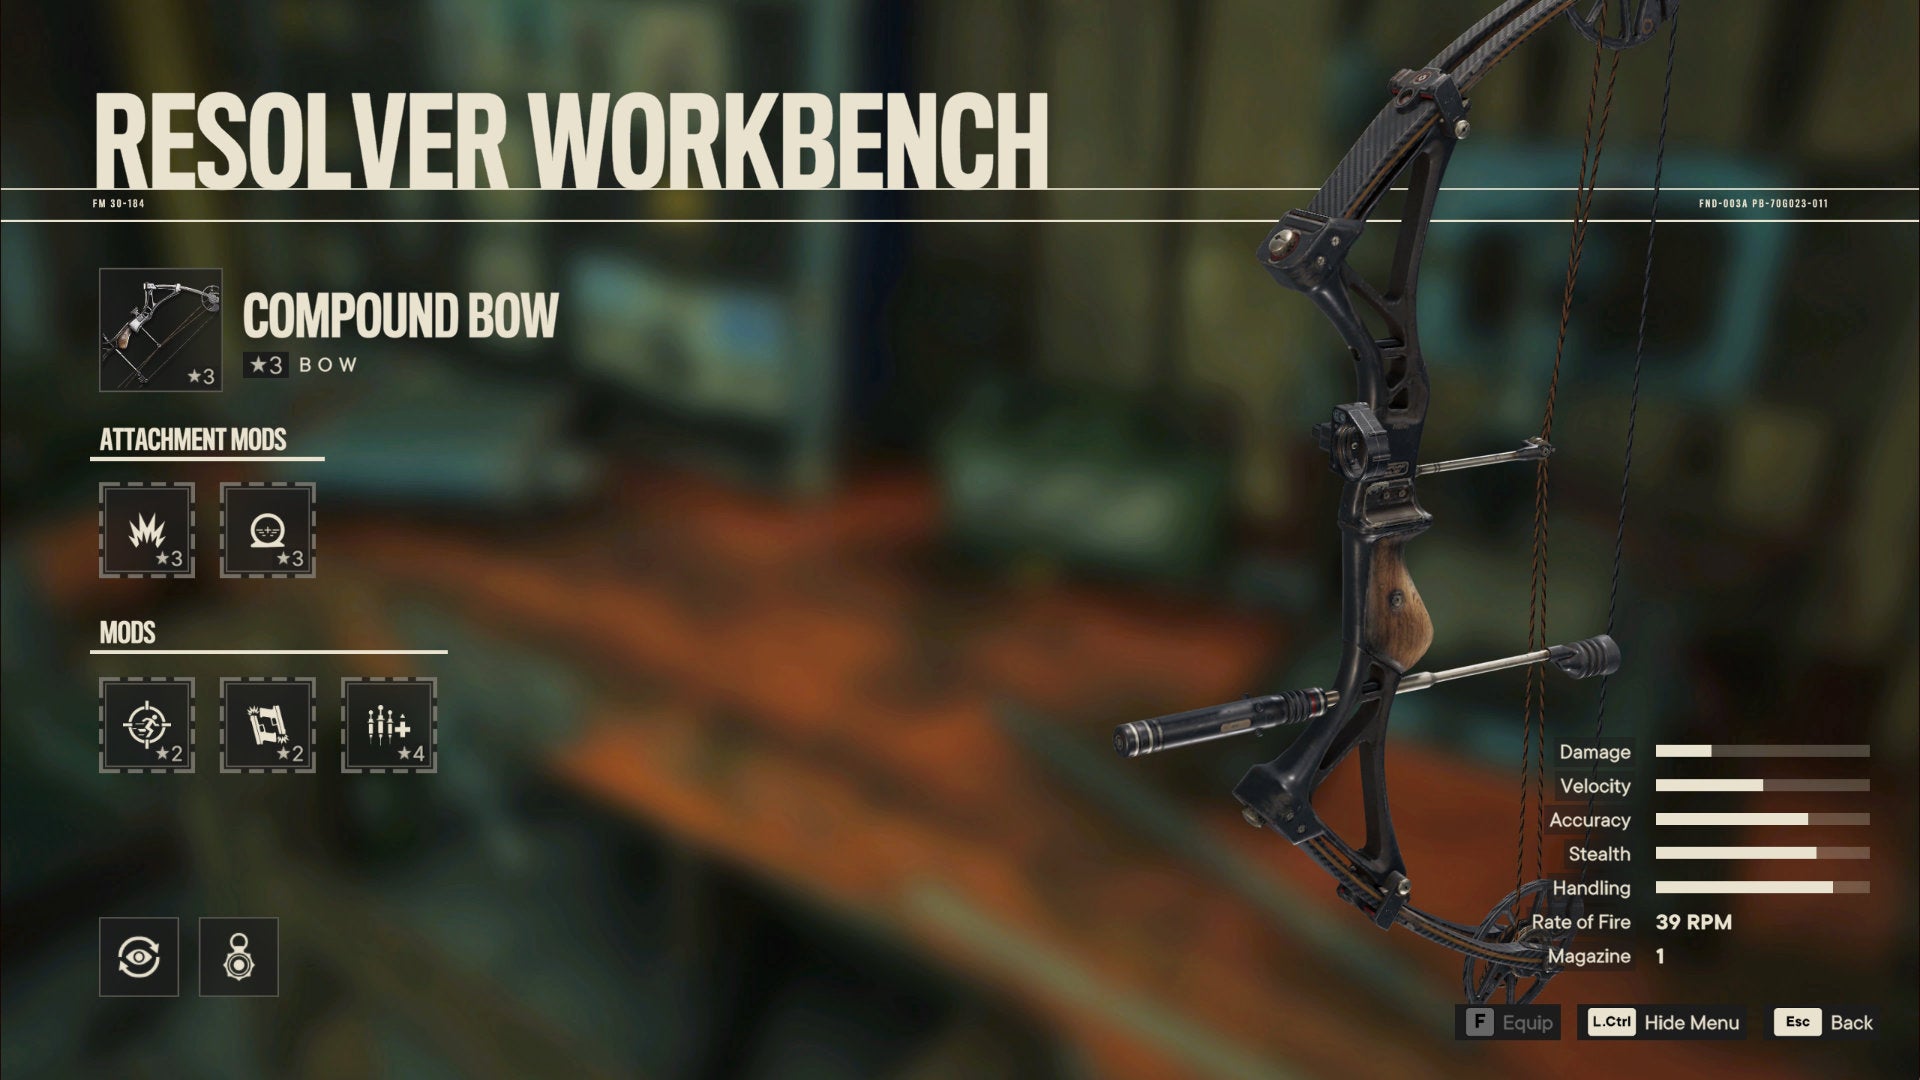 A screenshot of the Workbench screen in Far Cry 6 with the Compound Bow selected.